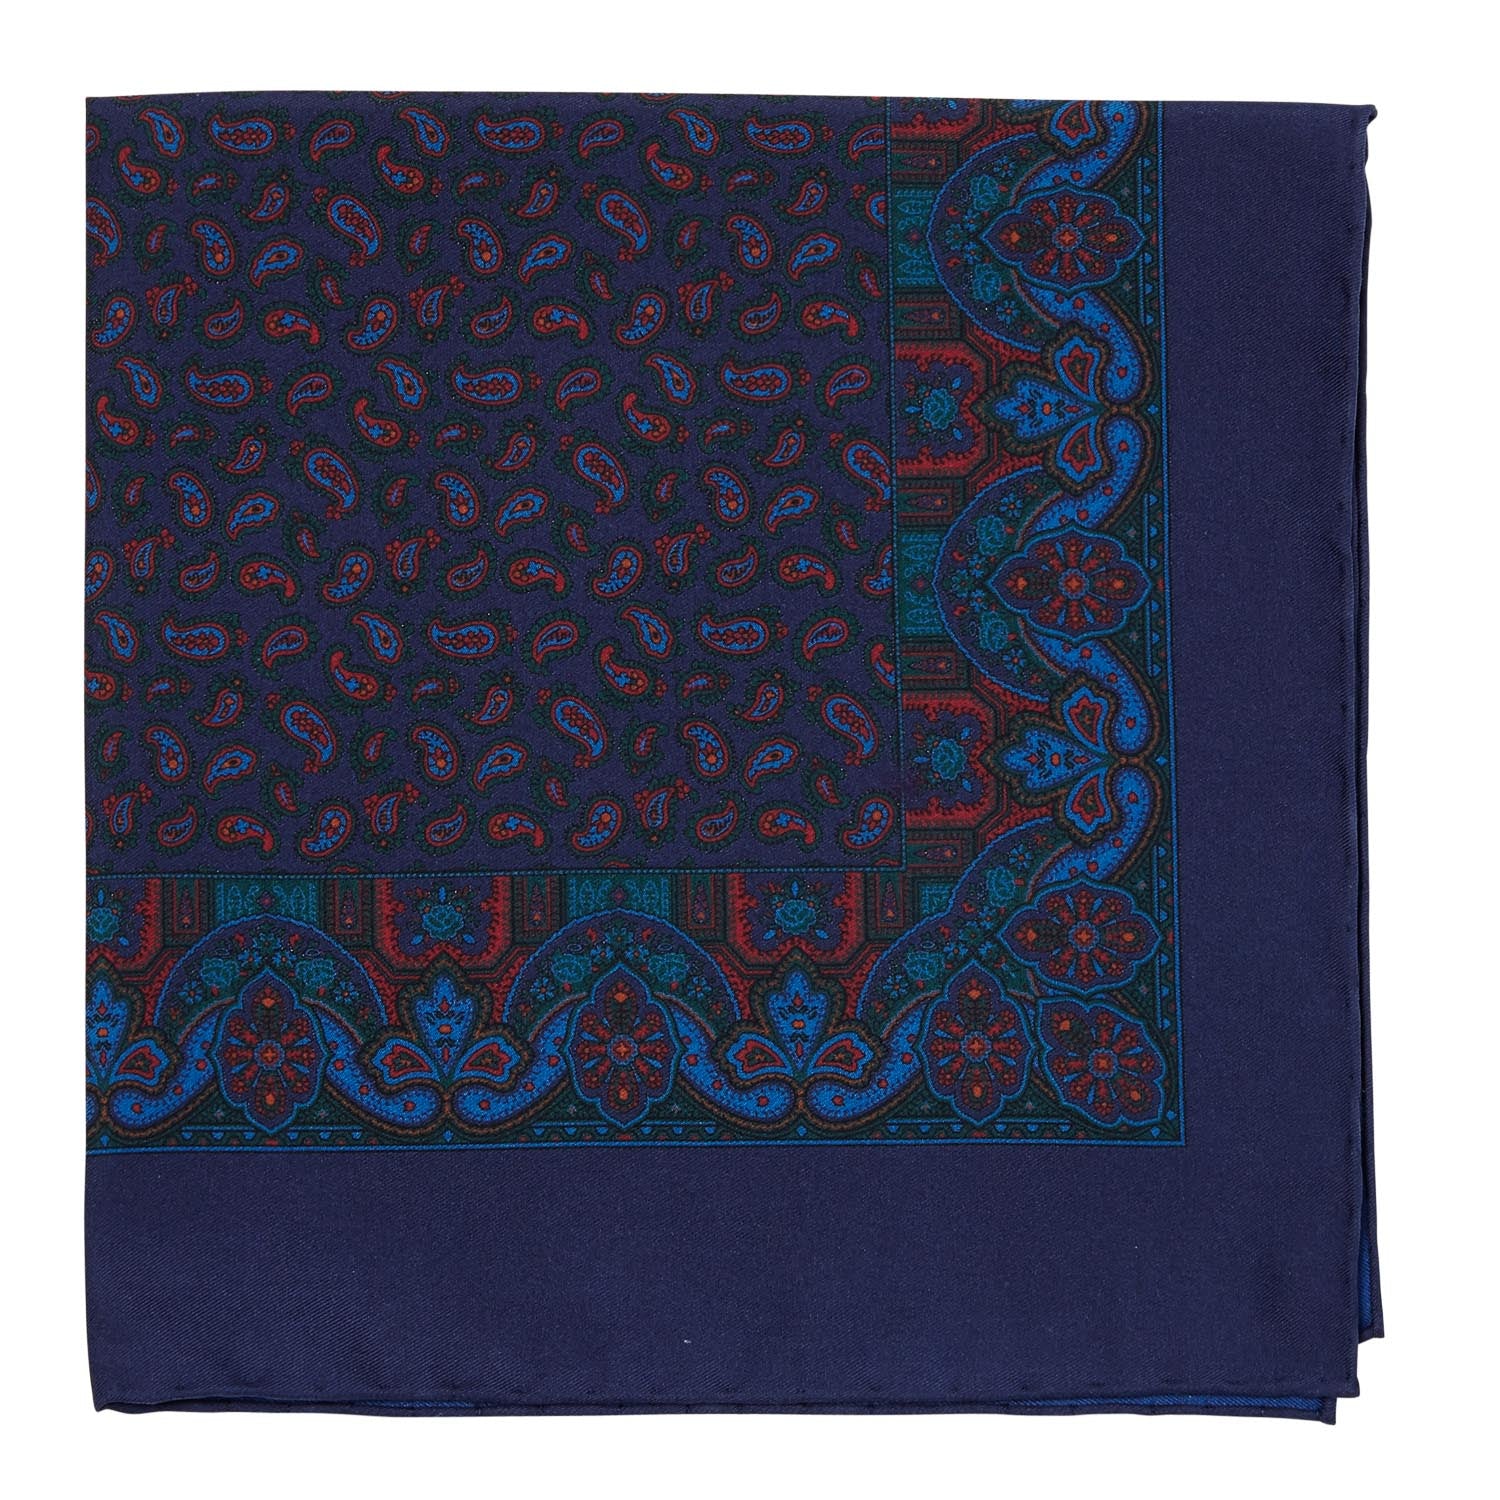 A Sovereign Grade Ancient Madder Midnight Paisley pocket square with hand-rolled edges from KirbyAllison.com.